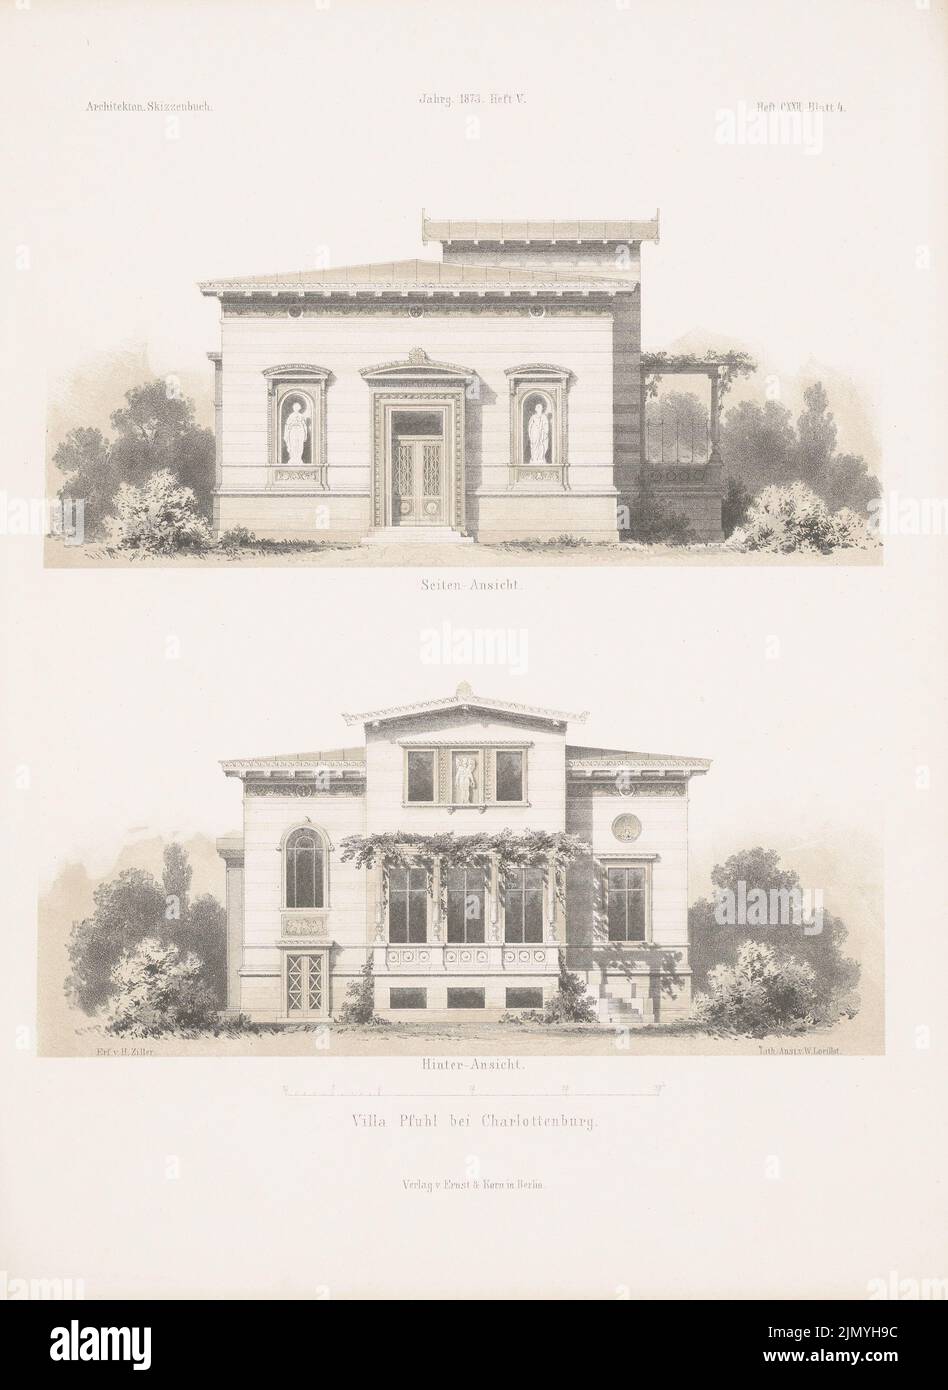 Ziller Hermann (1843-1915), Villa Pfuhl, Berlin-Charlottenburg. (From: Architectural sketchbook, H.122/5, 1873.) (1873-1873): View from behind, side view. Lithography colored on paper, 34.1 x 24.8 cm (including scan edges) Stock Photo